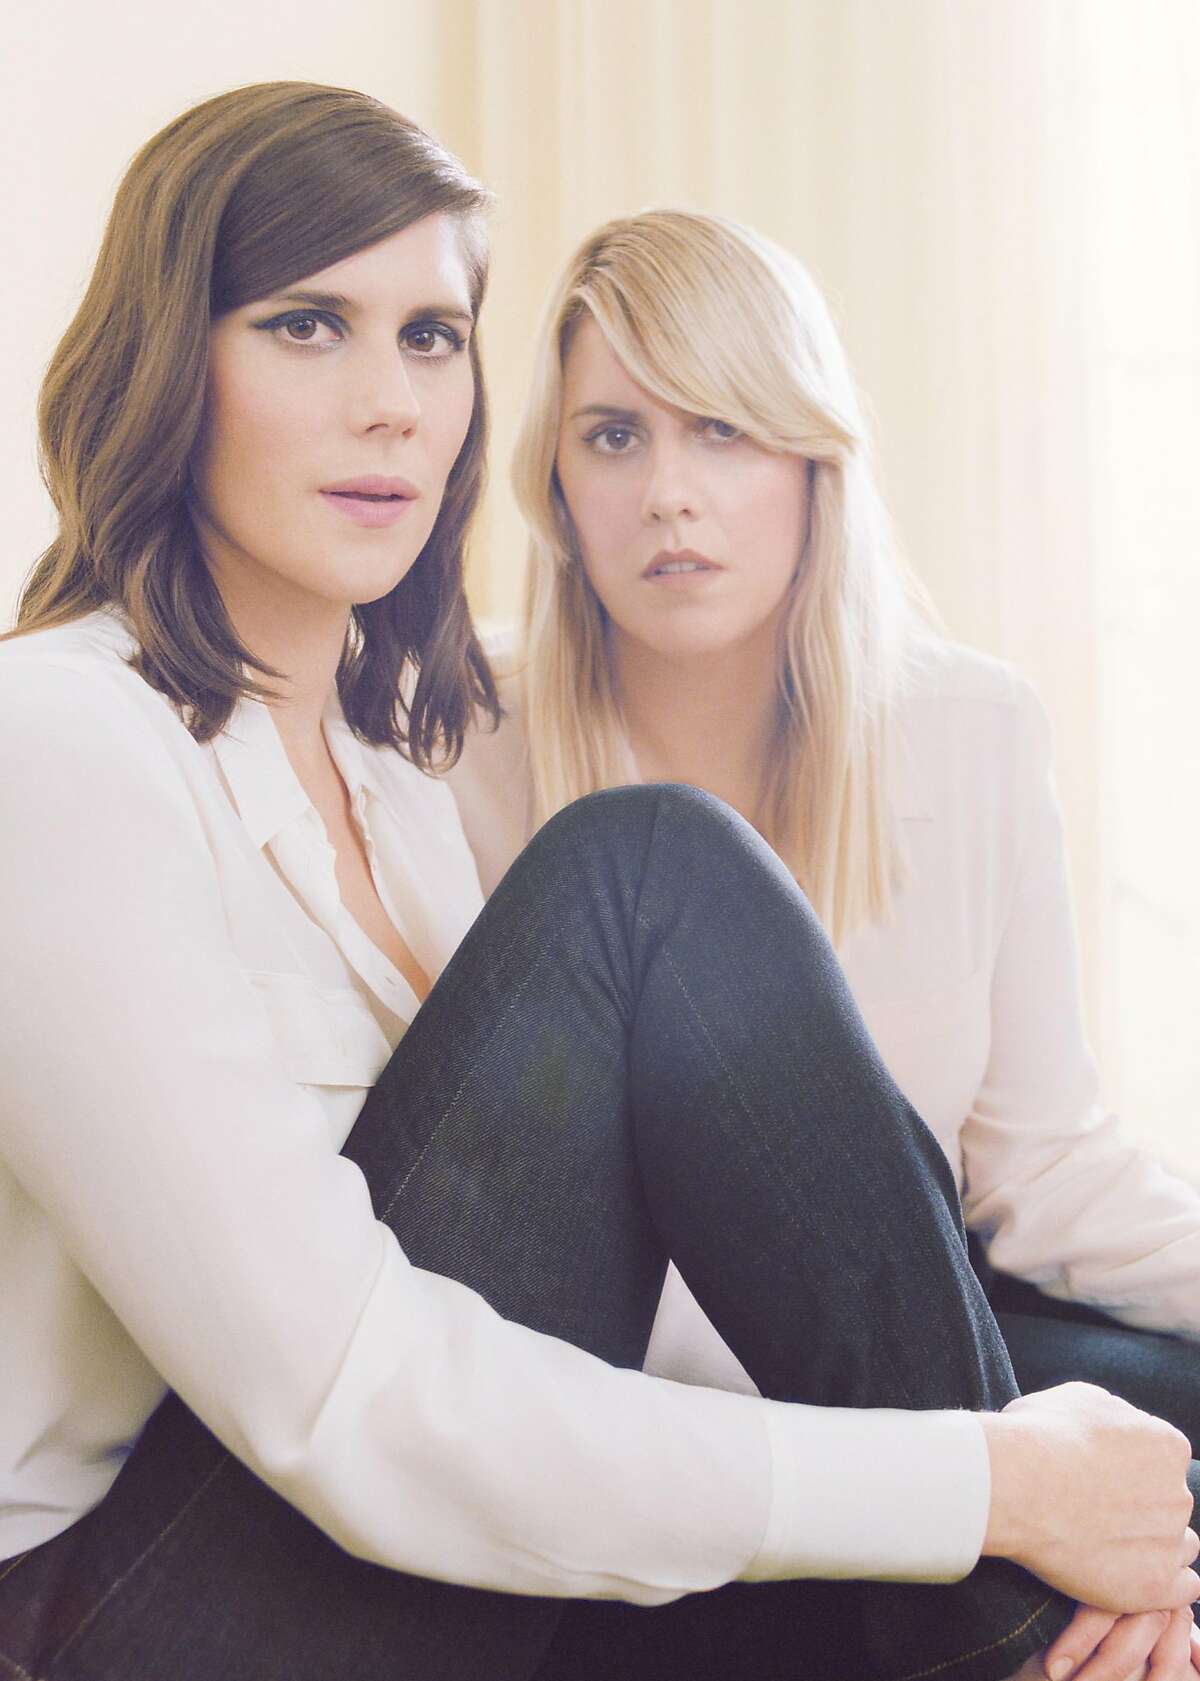 Portrait of Laura and Kate Mulleavy, the sister fashion designers behind the acclaimed label Rodarte.